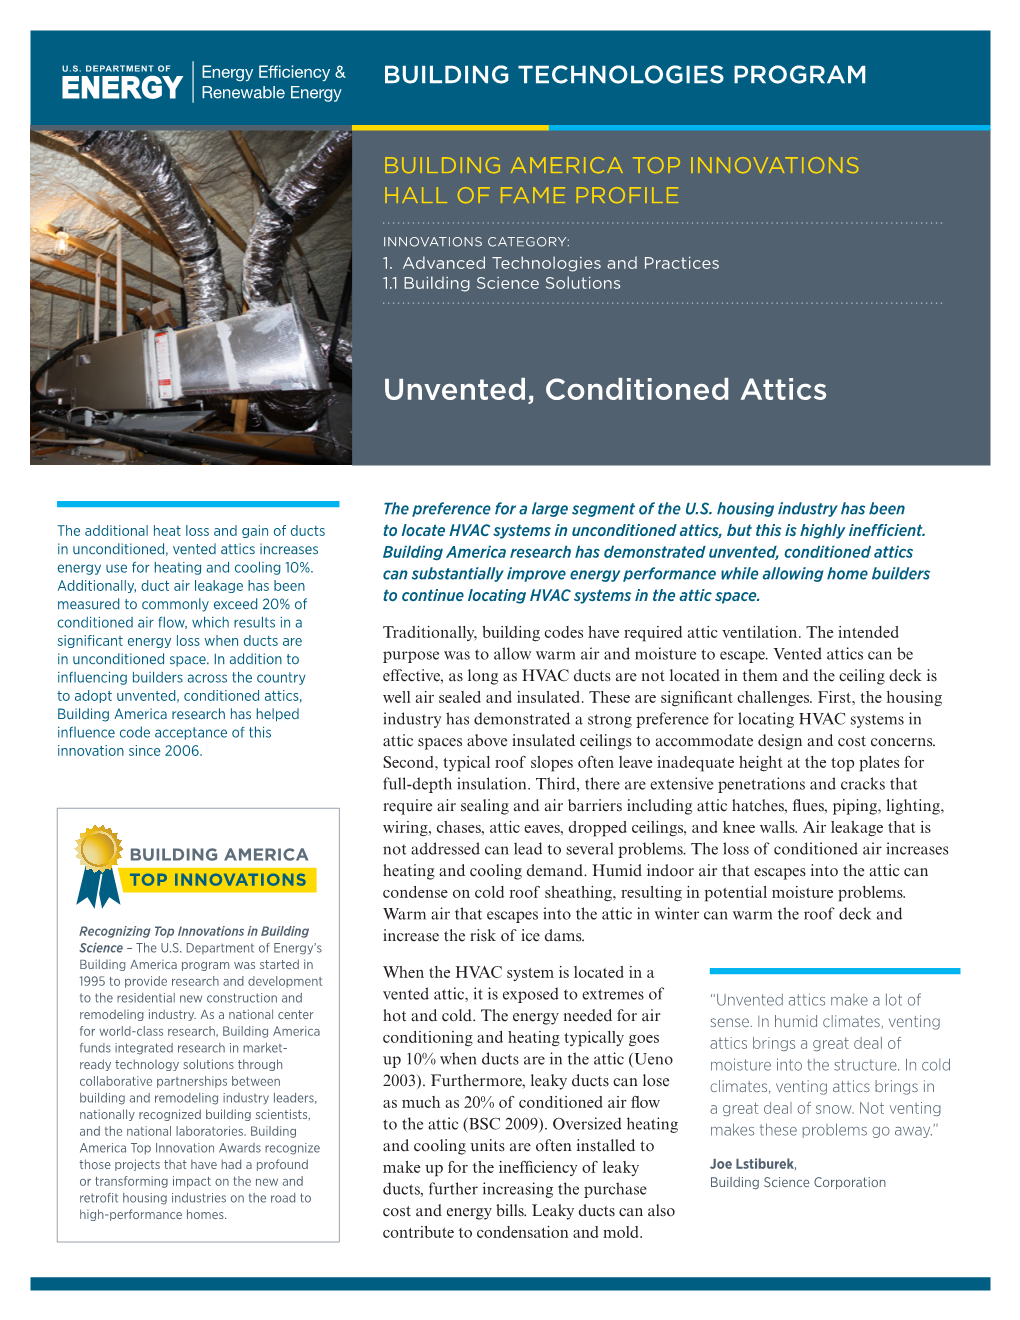 Building America Top Innovations Hall of Fame Profile – Unvented, Conditioned Attics